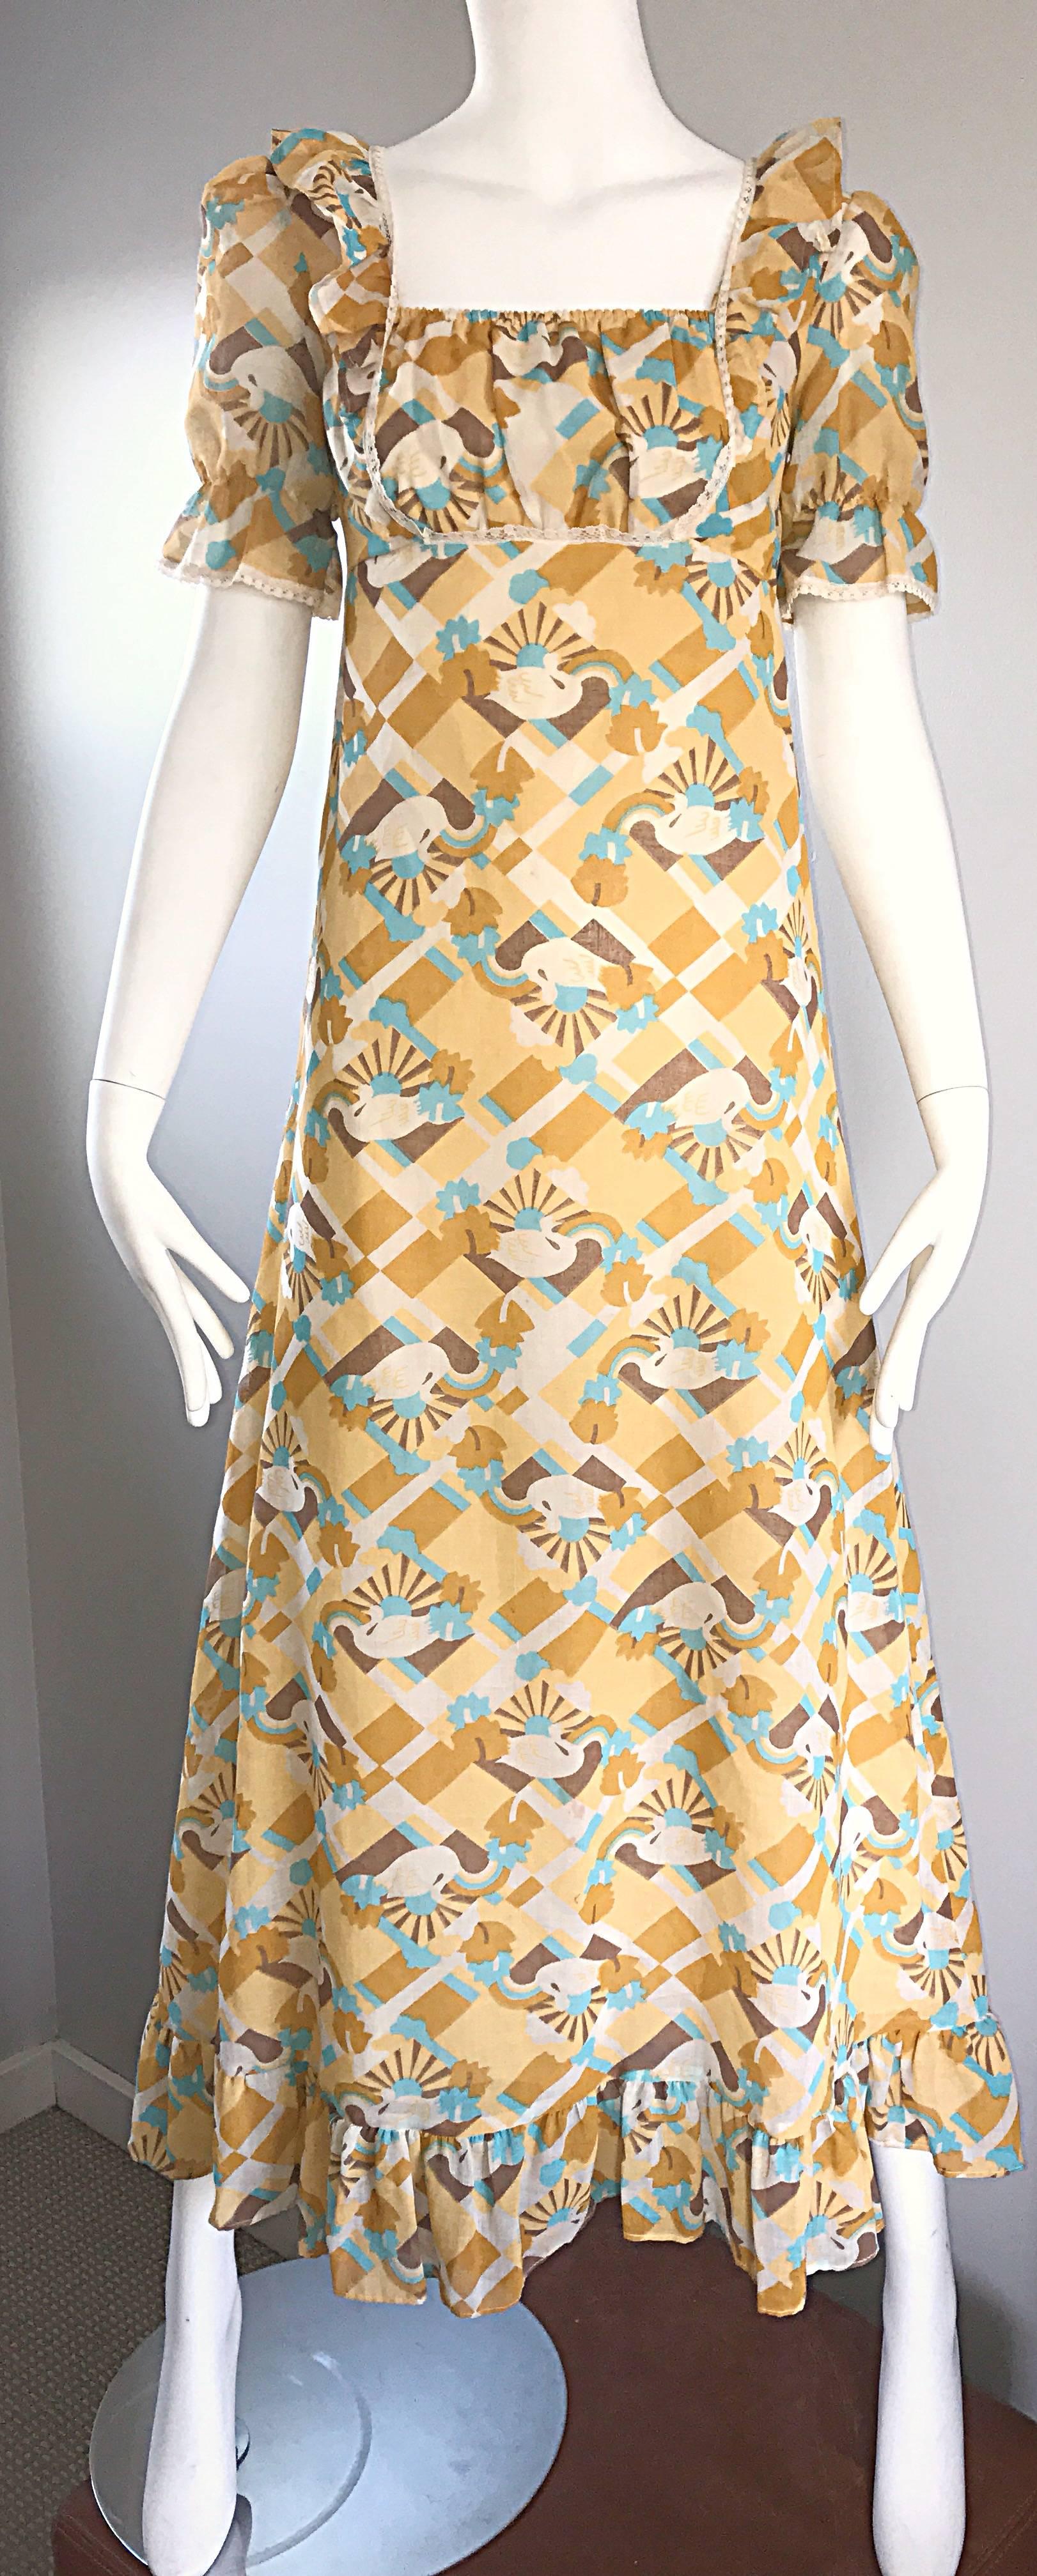 Women's 1970s Swan Print Novelty Cotton Boho Vintage 70s Blue and Yellow Maxi Dress  For Sale